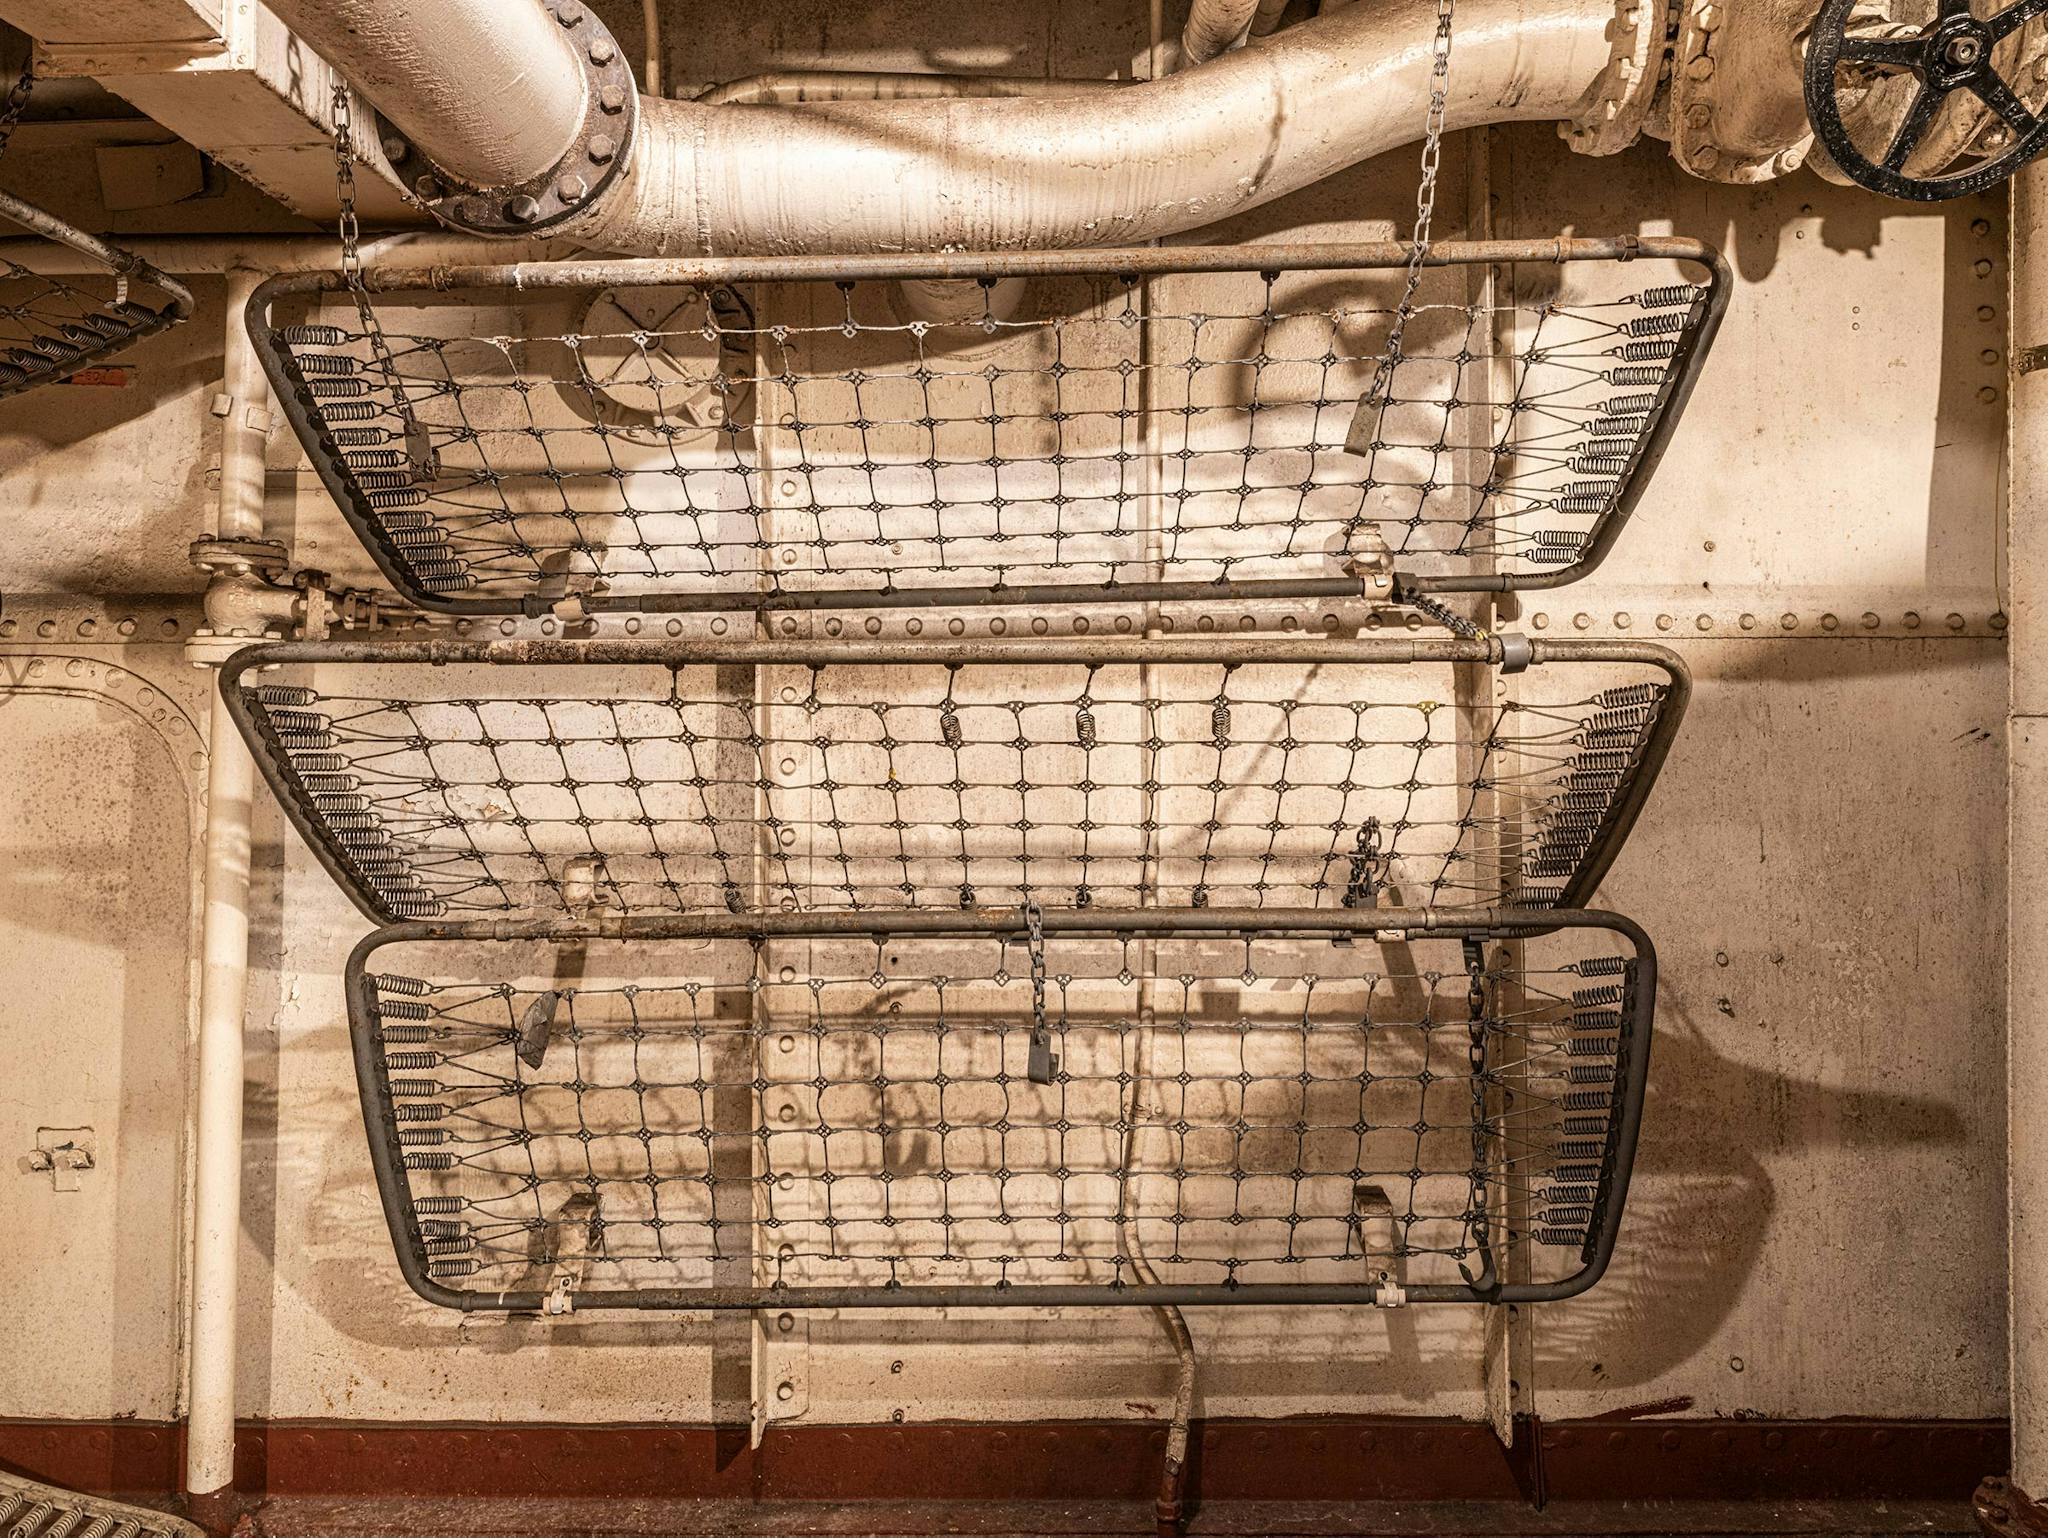 Every sailor had his own place to sleep. Some did so in bunks like these, made of pipe racks on which a thin mattress was thrown, while many dozed in hammocks or cots.